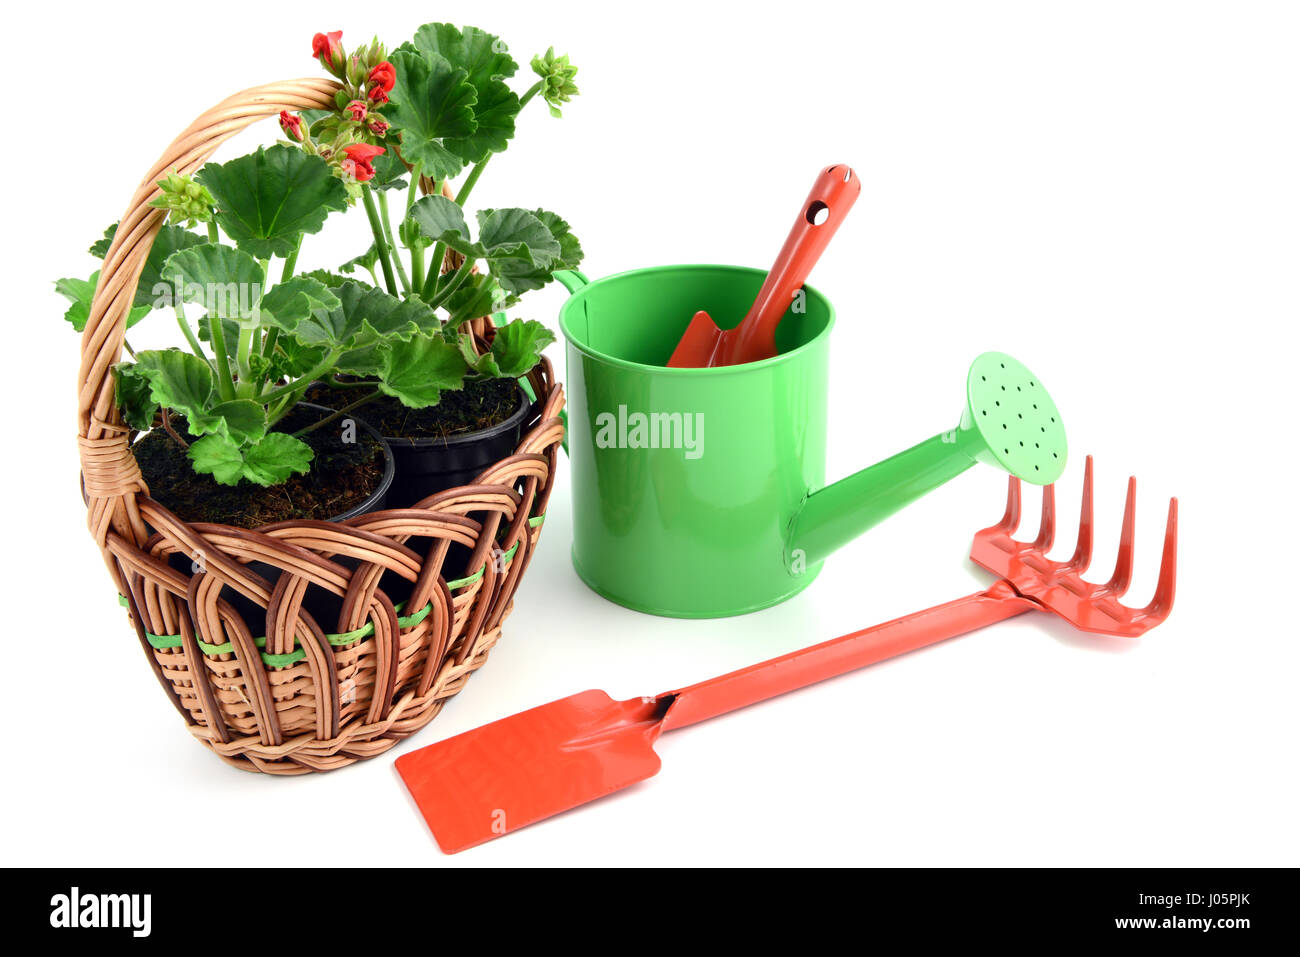 Geranium flowerpot in a basket with gardening tools like garden fork, shovel, water can. isolated  background Stock Photo